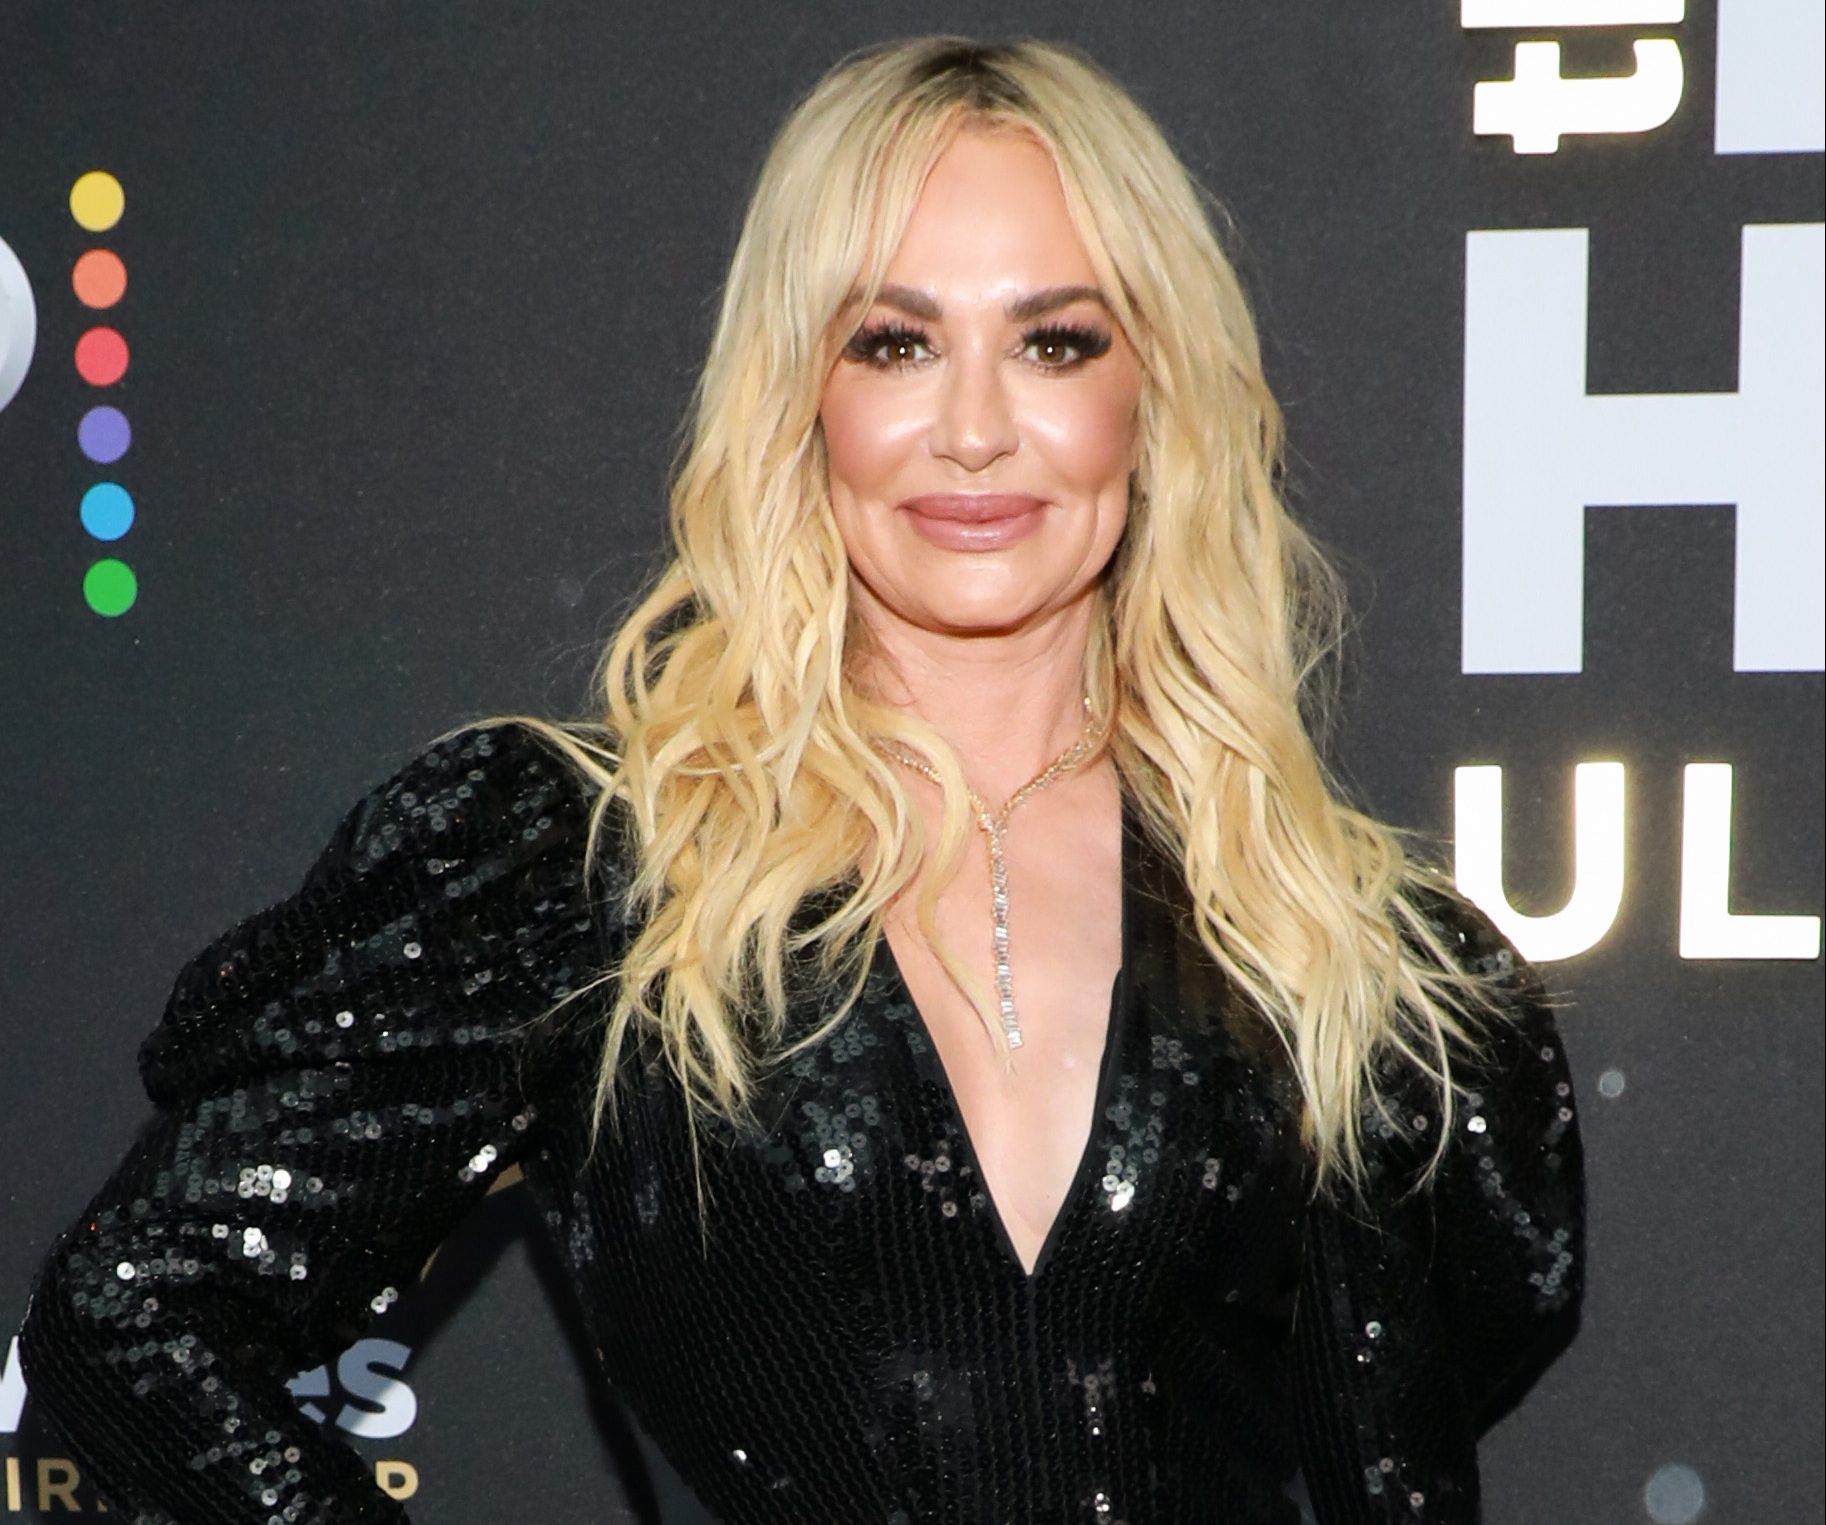 Taylor Armstrong makes housewives history as she joins Orange County cast after leaving Beverly Hills